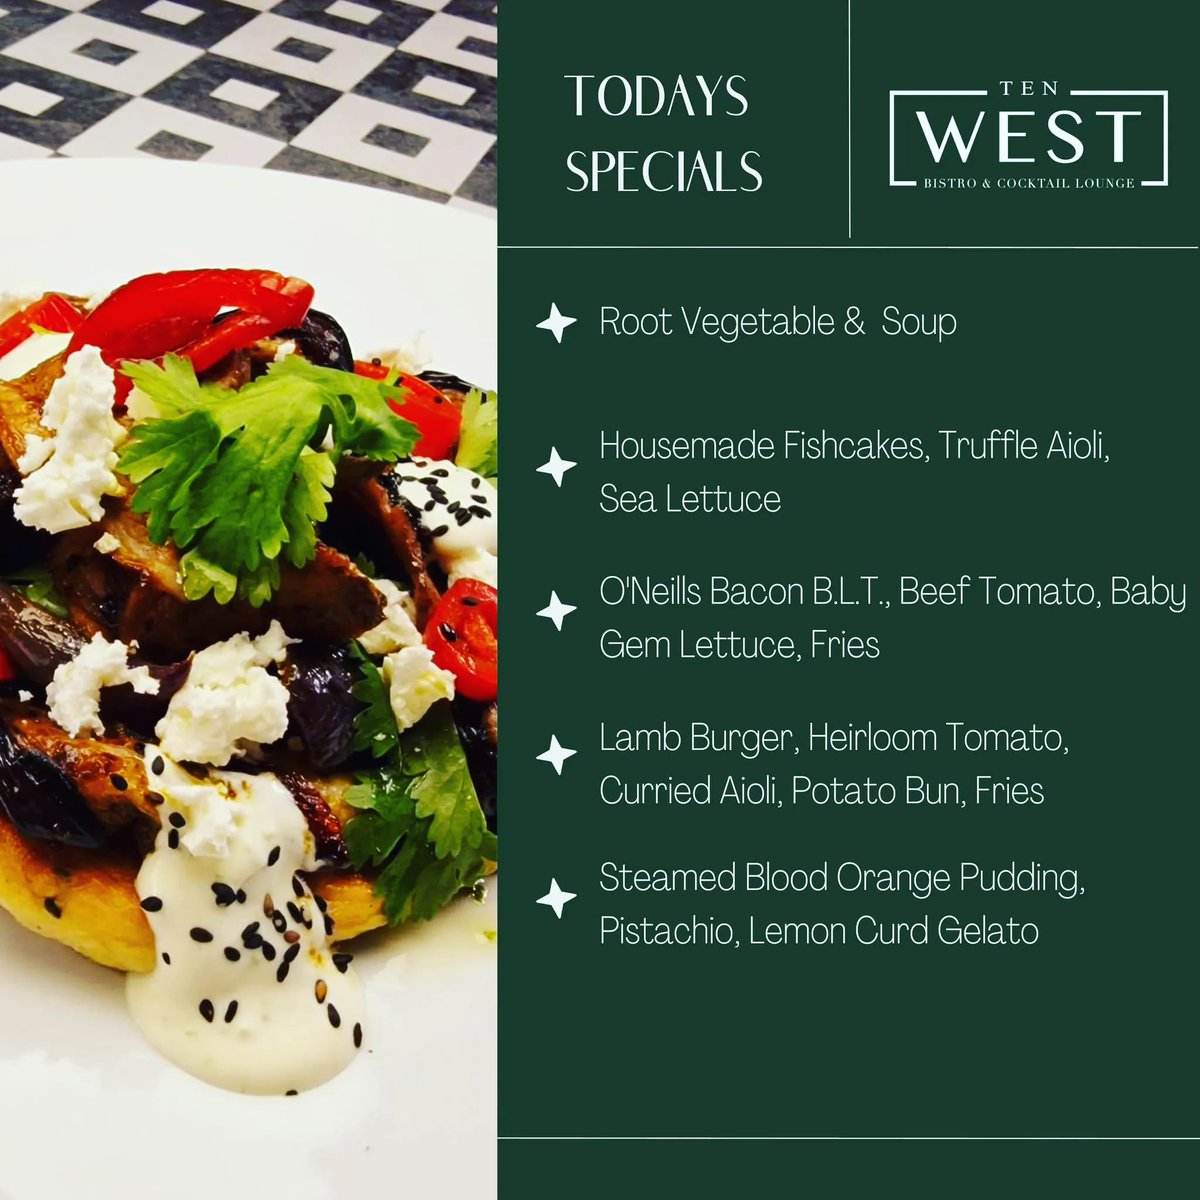 🧑‍🍳 Todays Chef Specials 🧑‍🍳 Its Mid-Term Get the gang together and lets do lunch 🤩 #10west #10westbistro #10westwexford #westisbest #dineinwexford #tasteofwexford #wexfordrestaurant #wexforbistro #visitwexford #discoverwexford